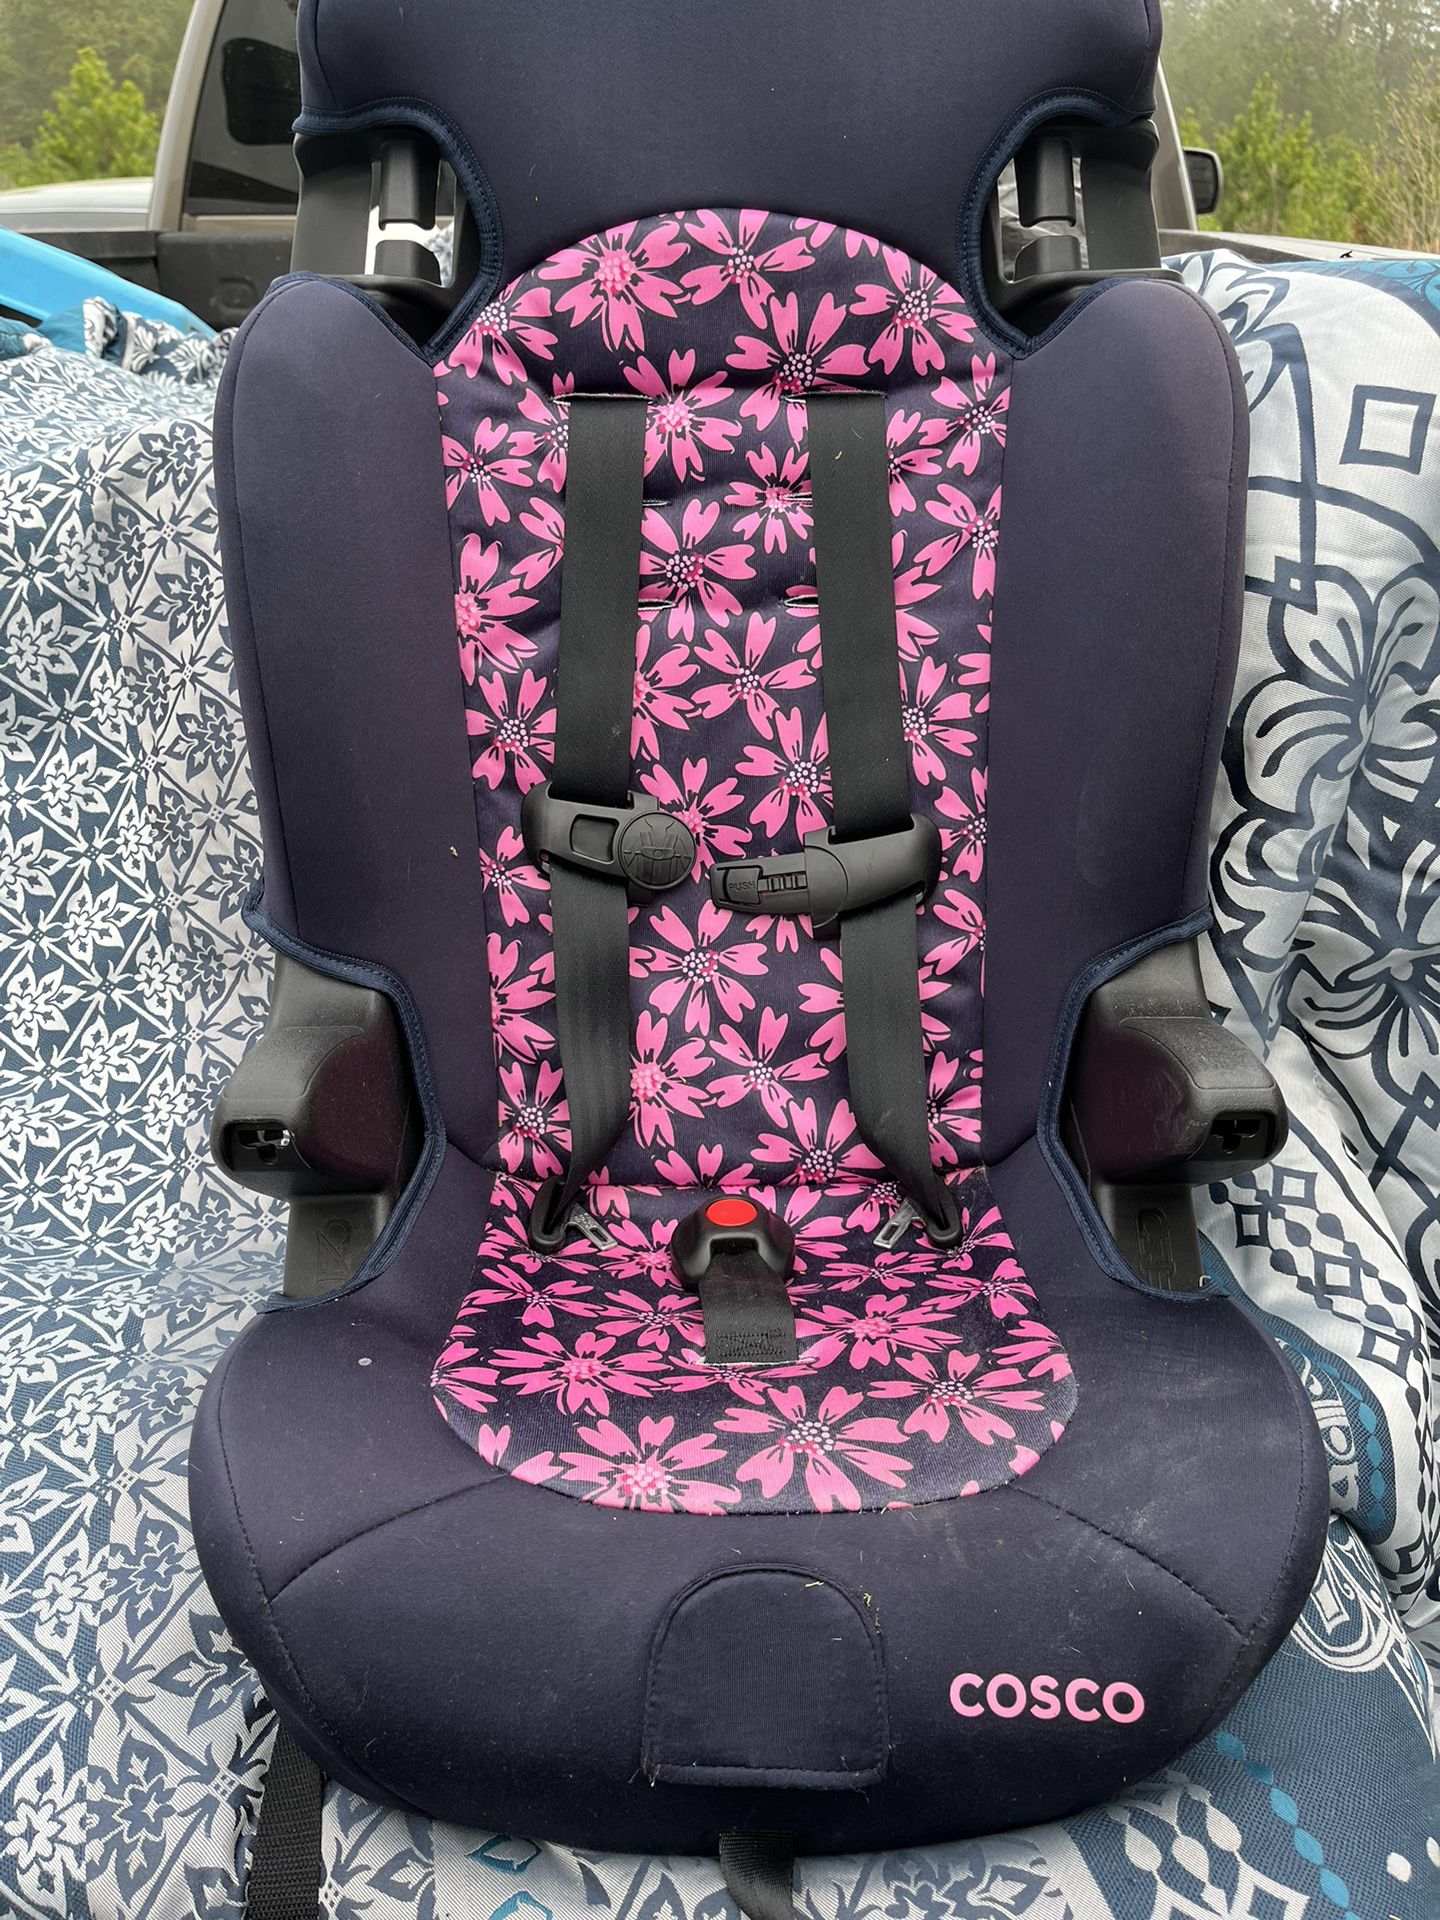 Booster Seat From Cosco